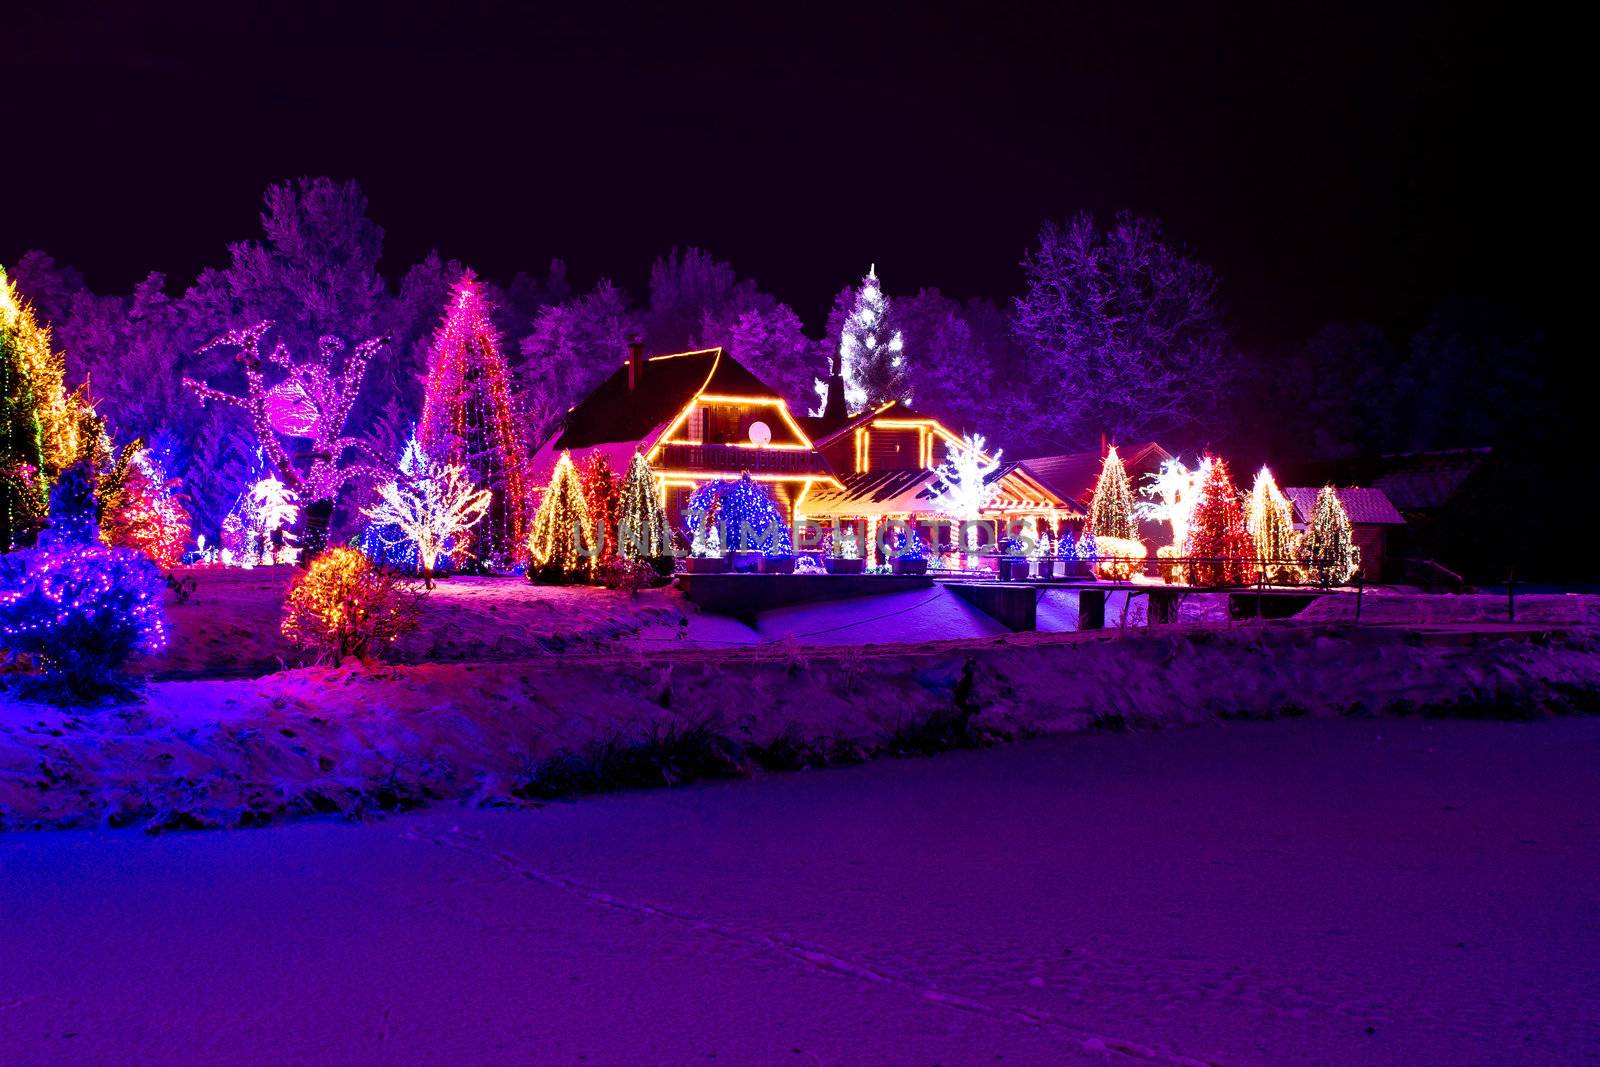 Christmas fantasy - park, forest, pine tree & lodge in xmas lights